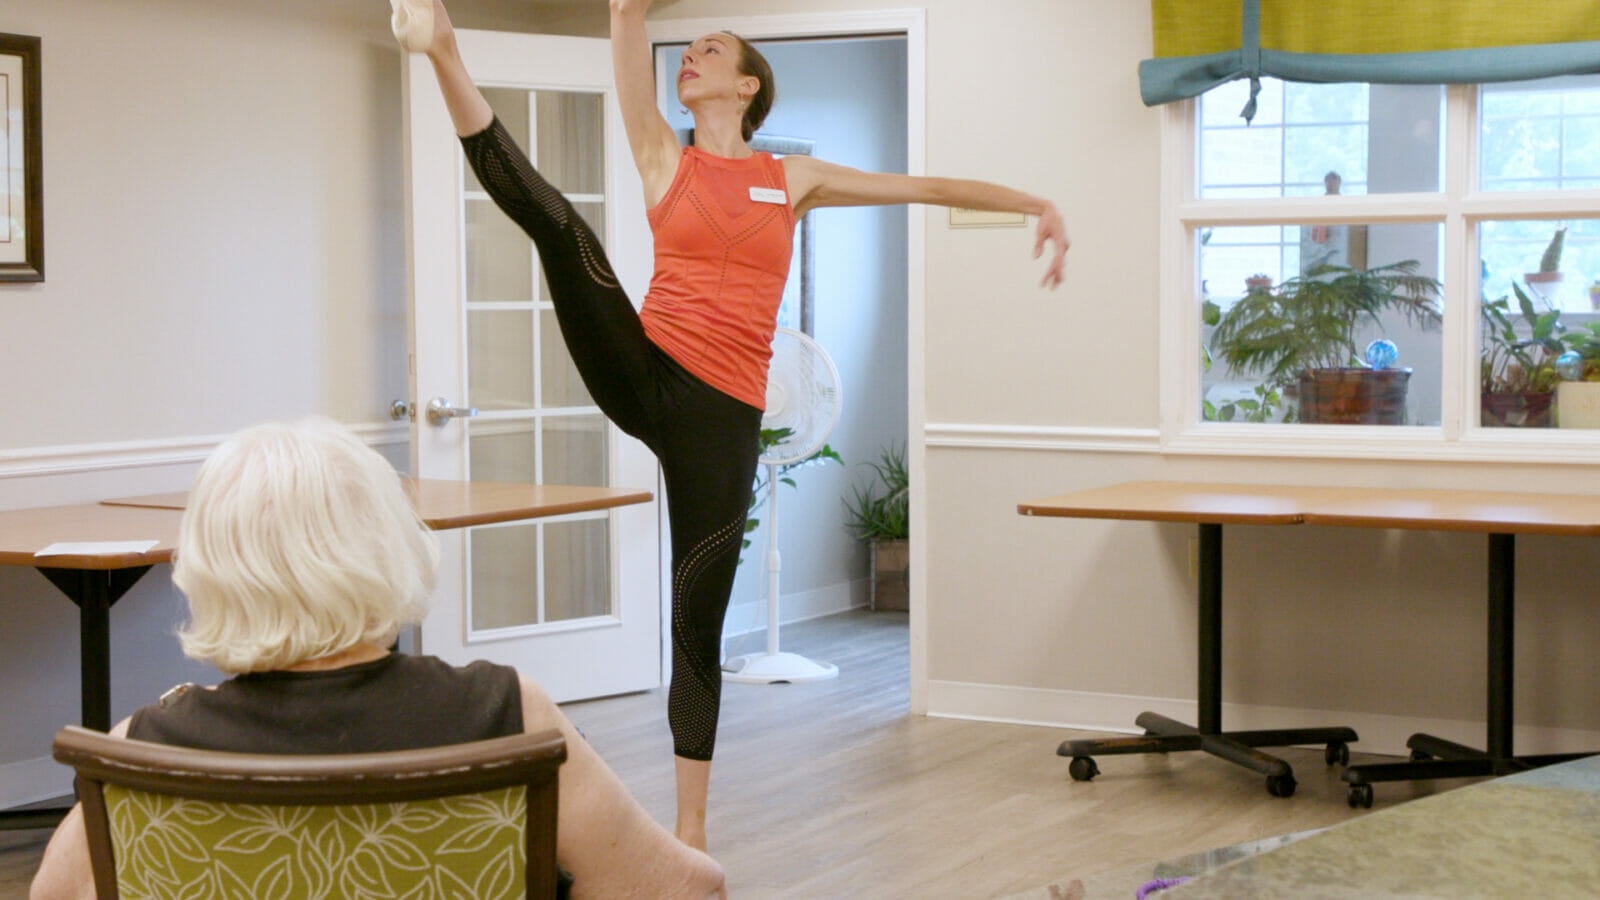 A woman in an orange shirt and black leggings kicks her leg up high in the air in a ballet move at the front of a room.